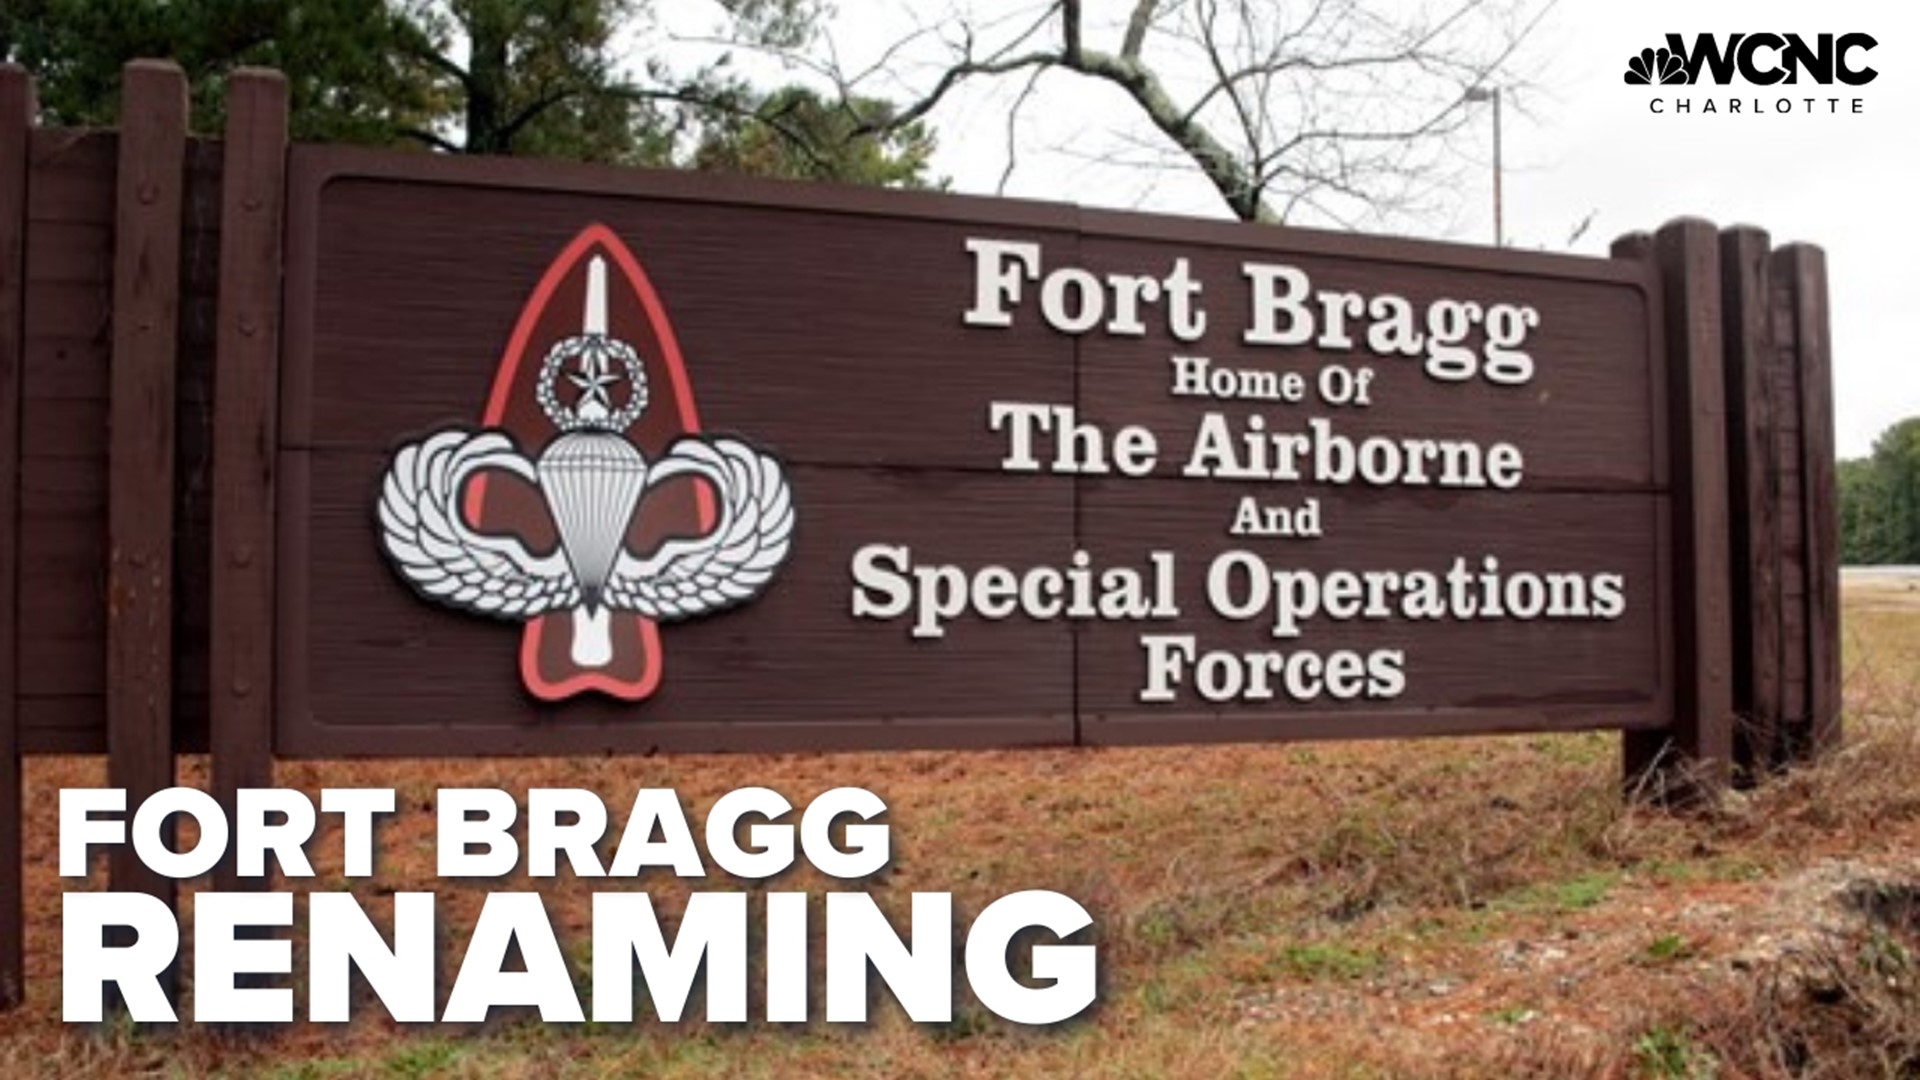 Fort Bragg will officially become Fort Liberty in a ceremony planned for this Friday.